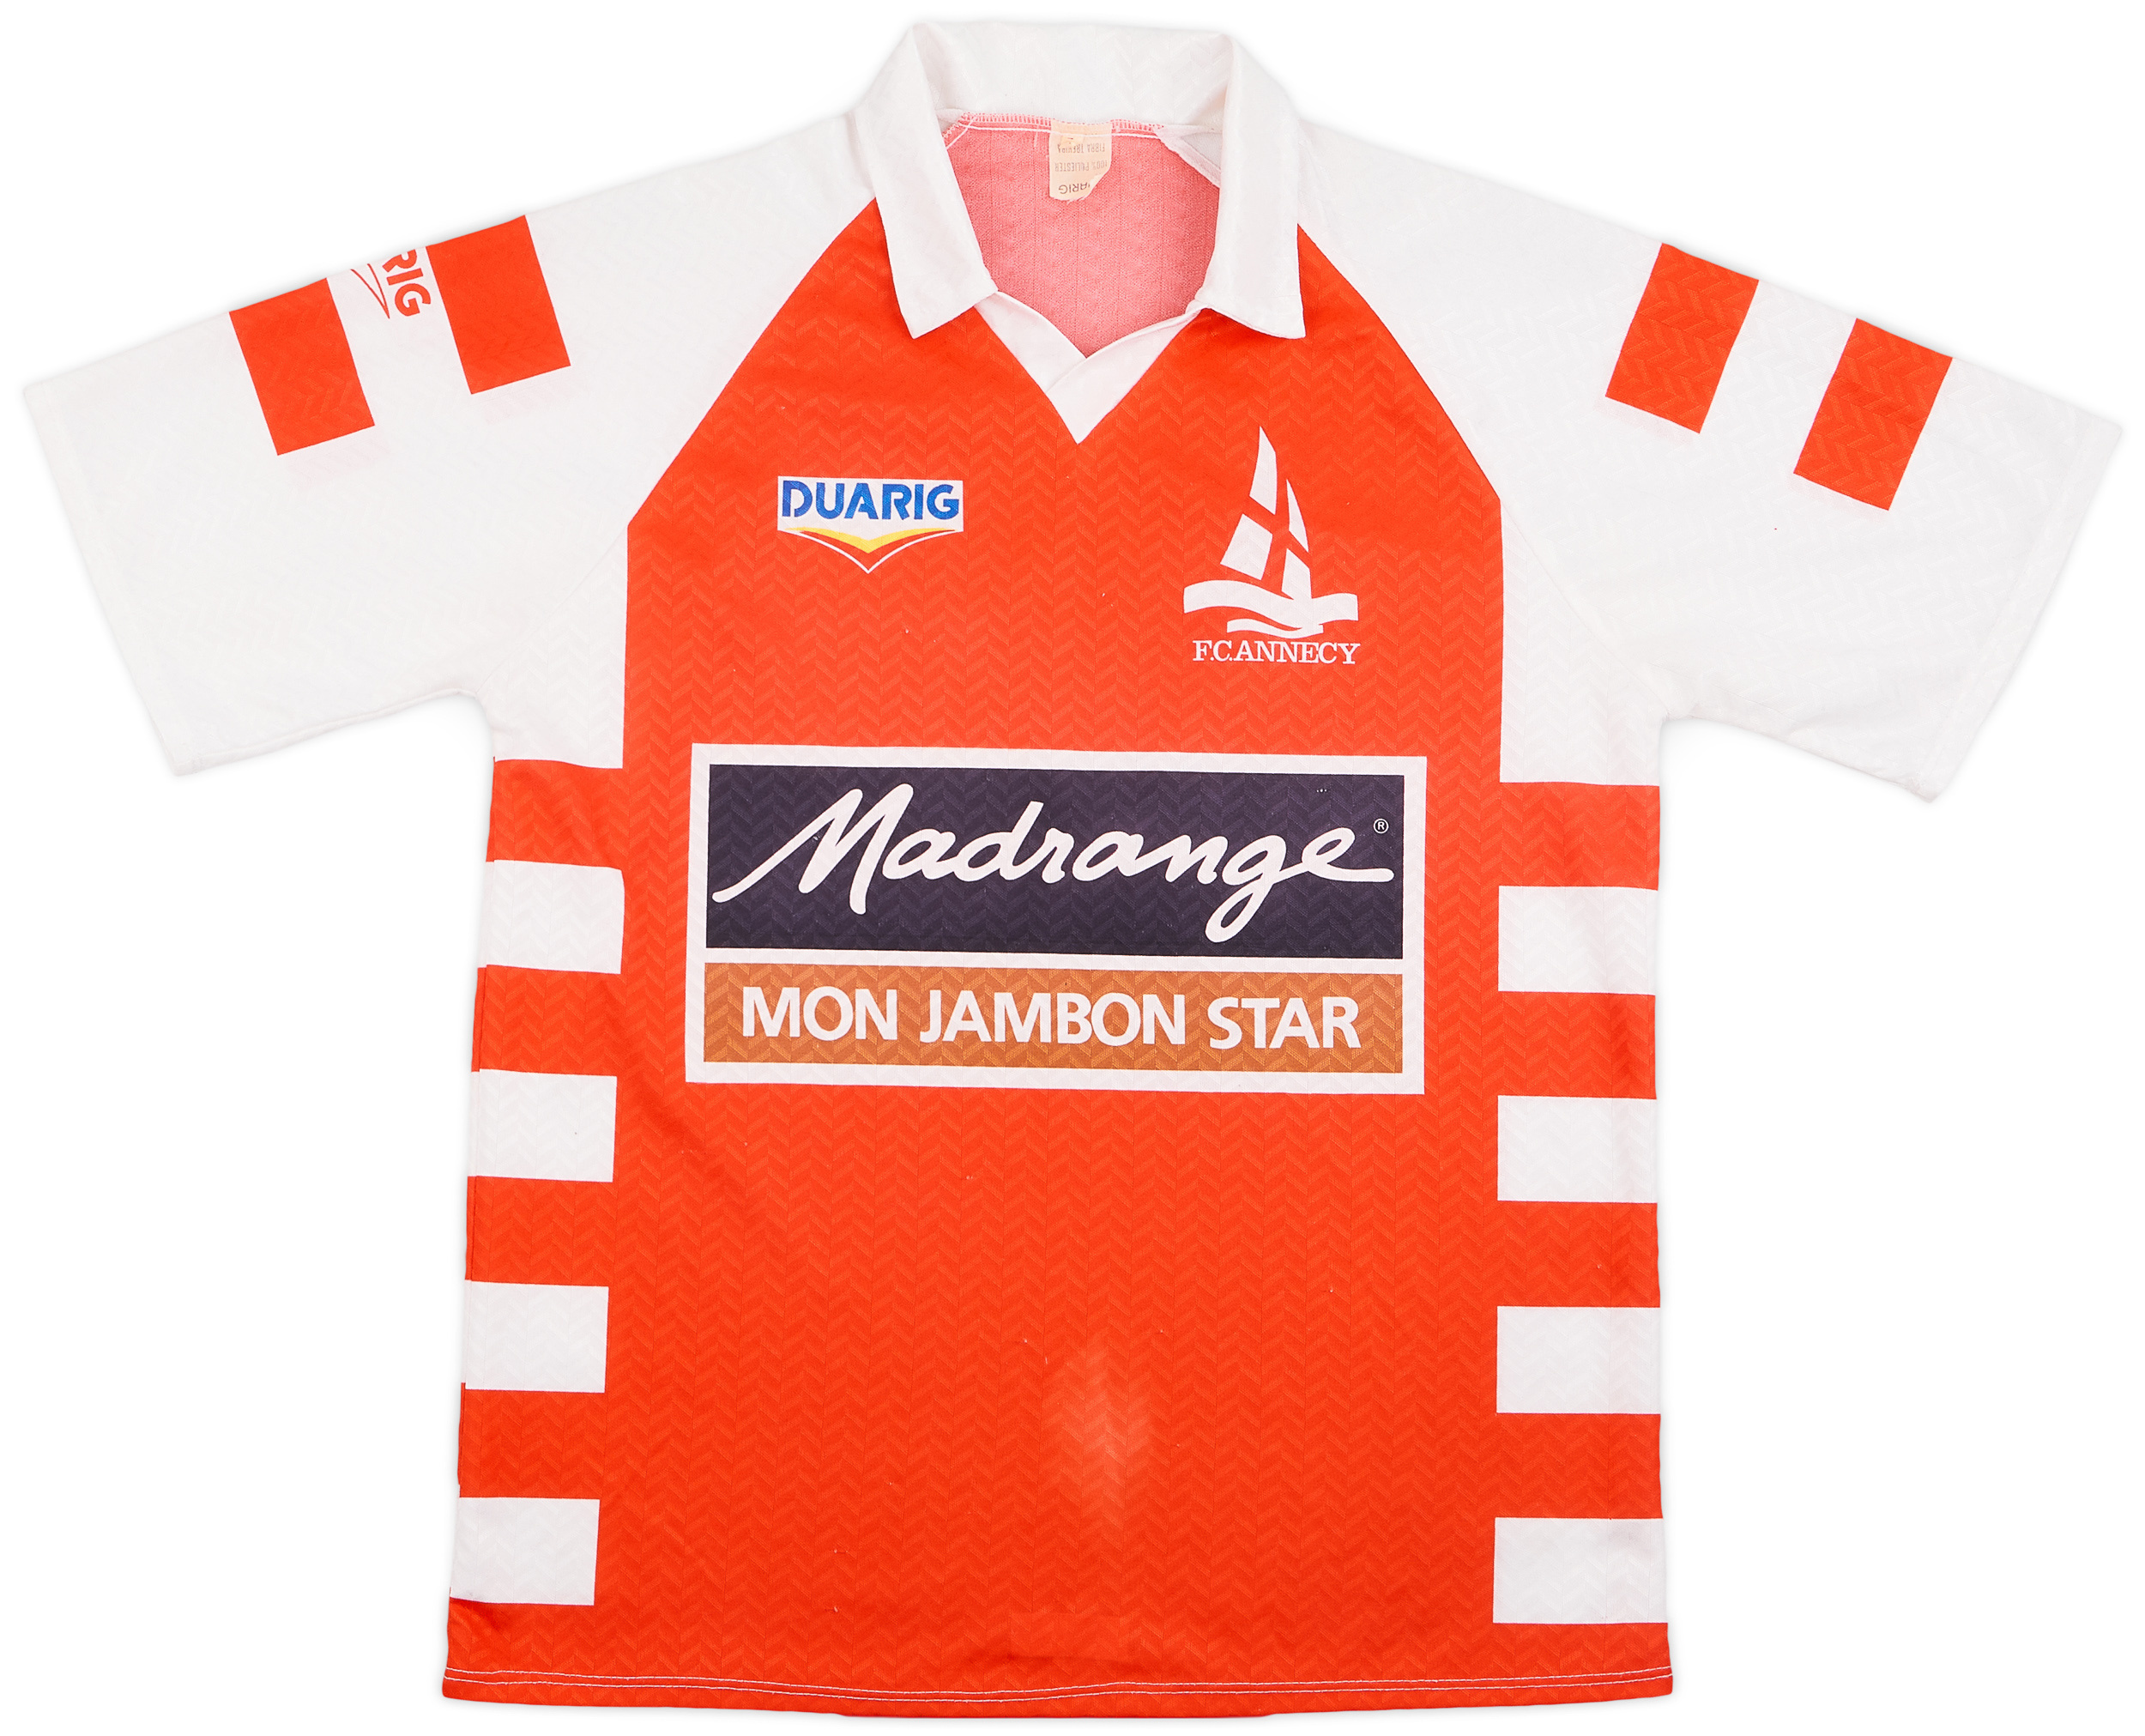 1994 Annecy Home Shirt - 7/10 - ()